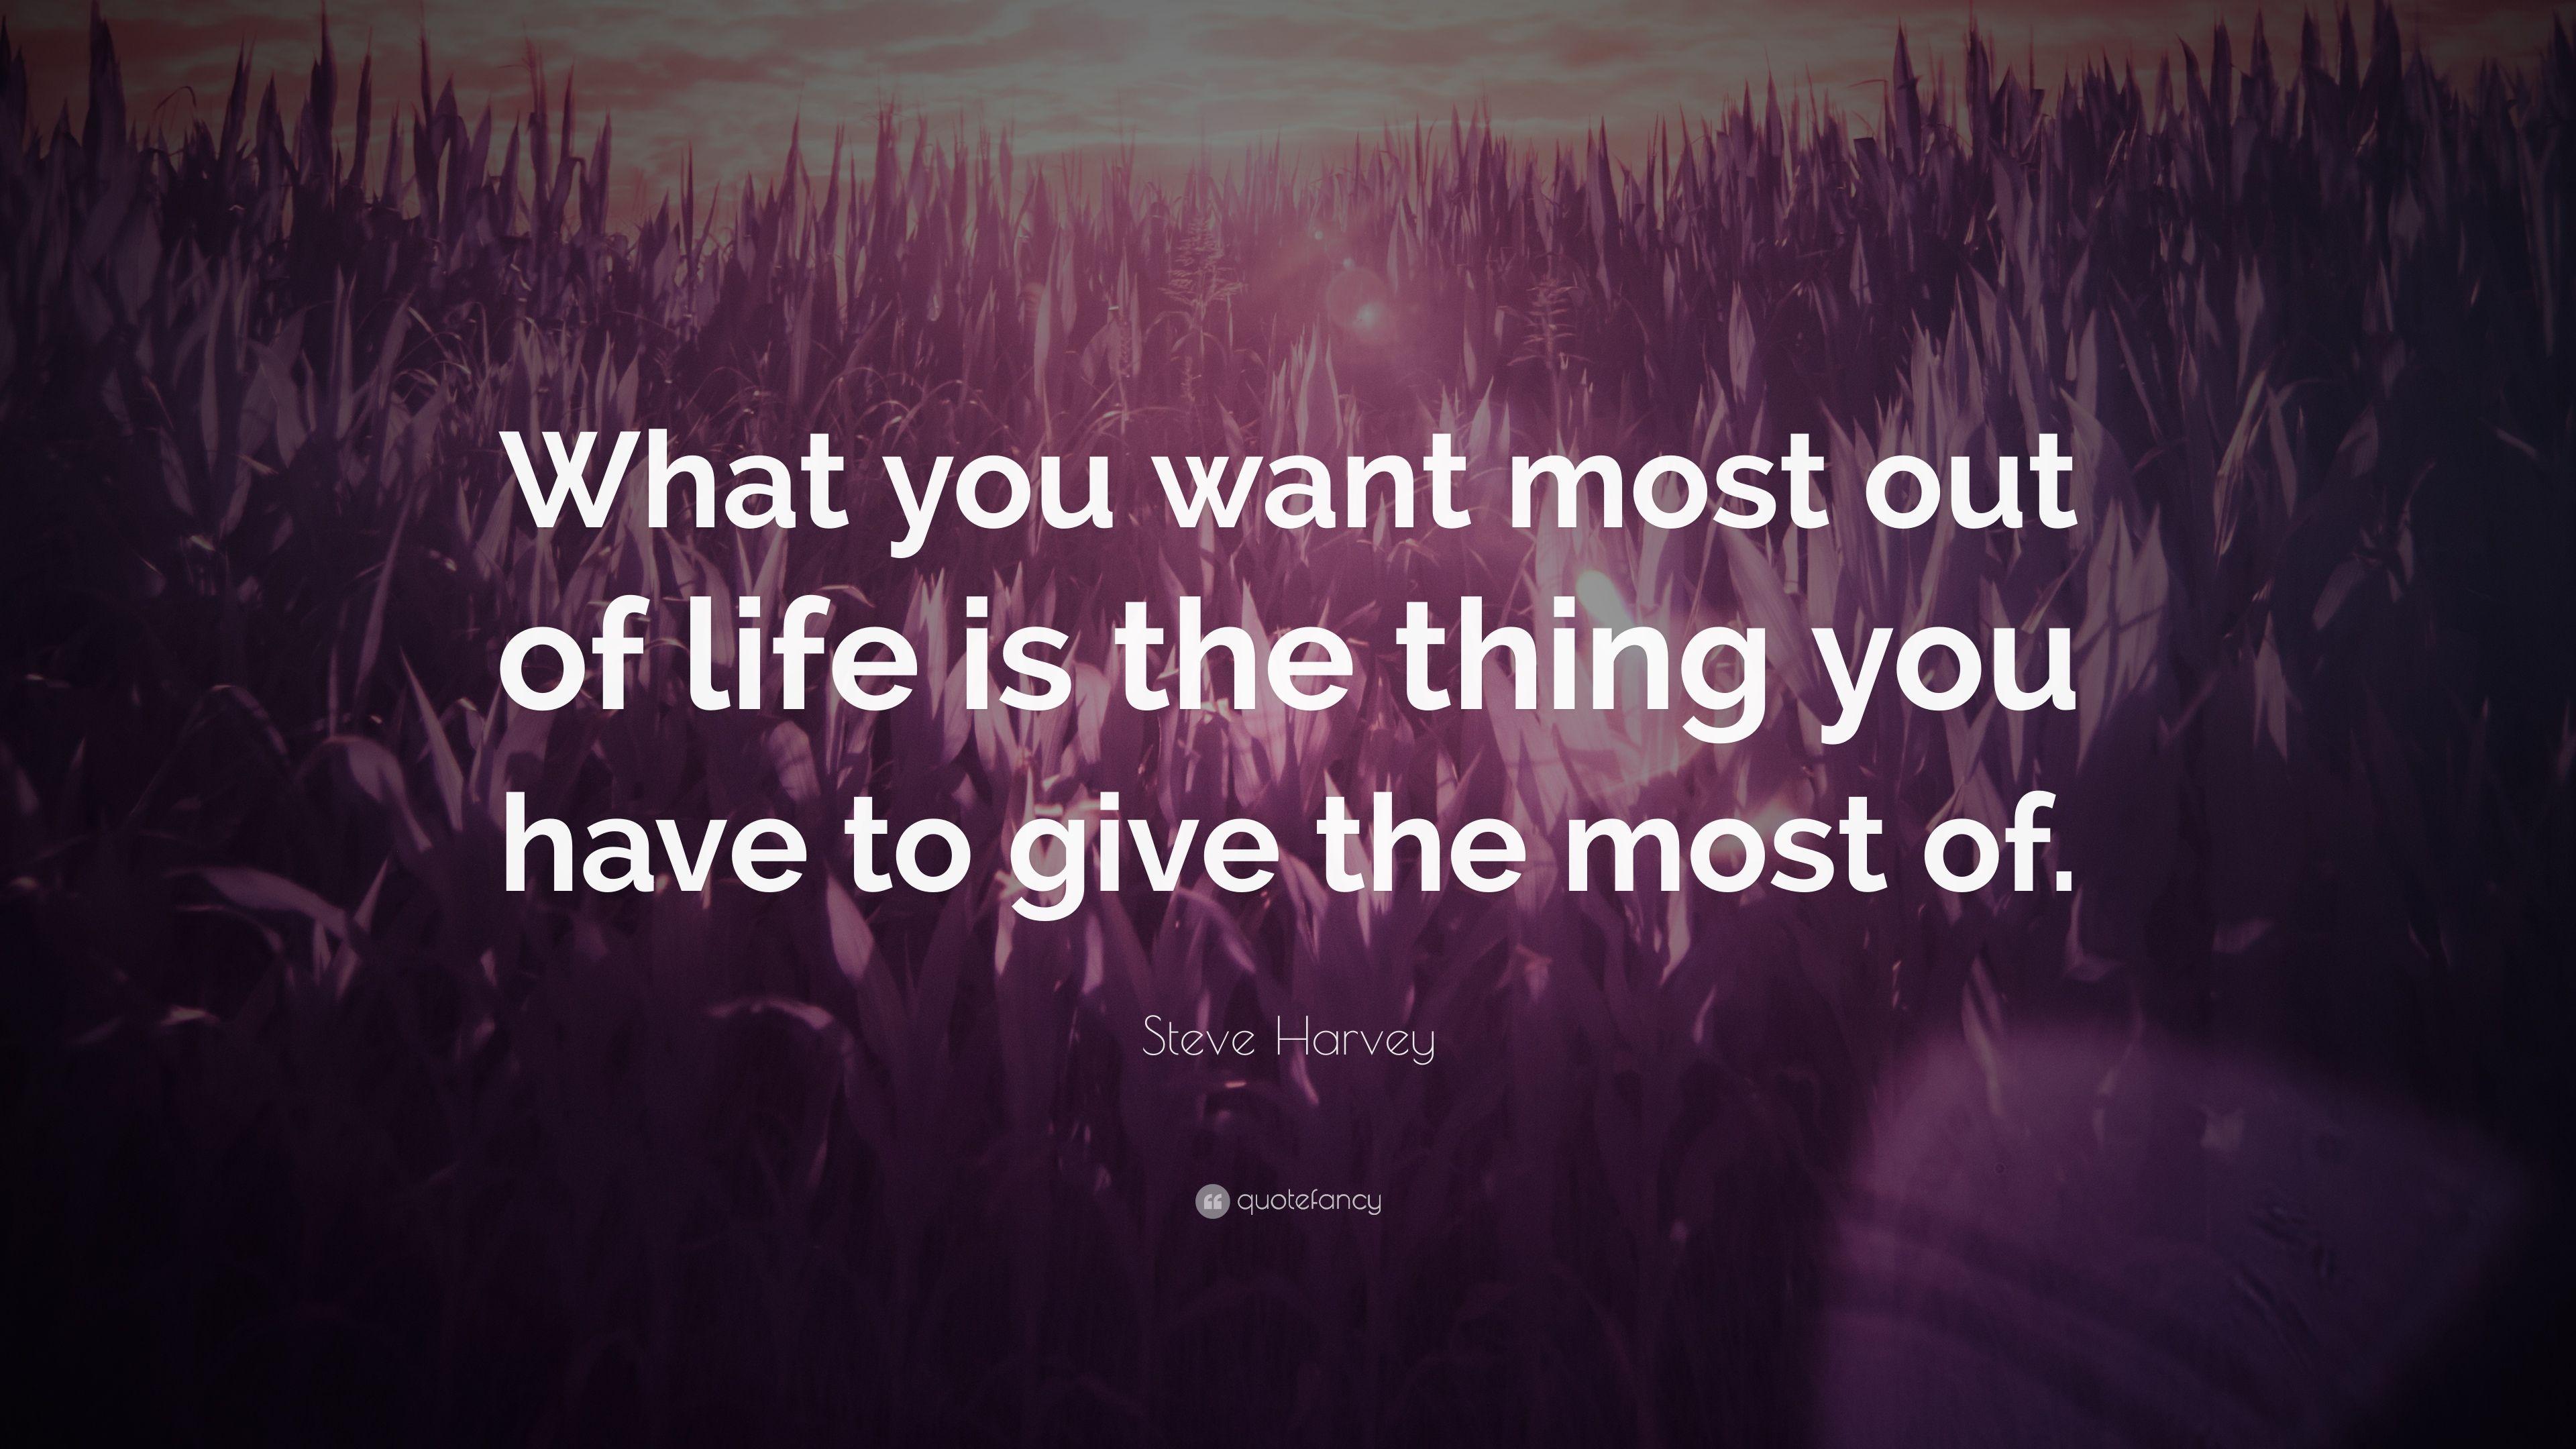 Steve Harvey Quote: “What you want most out of life is the thing you